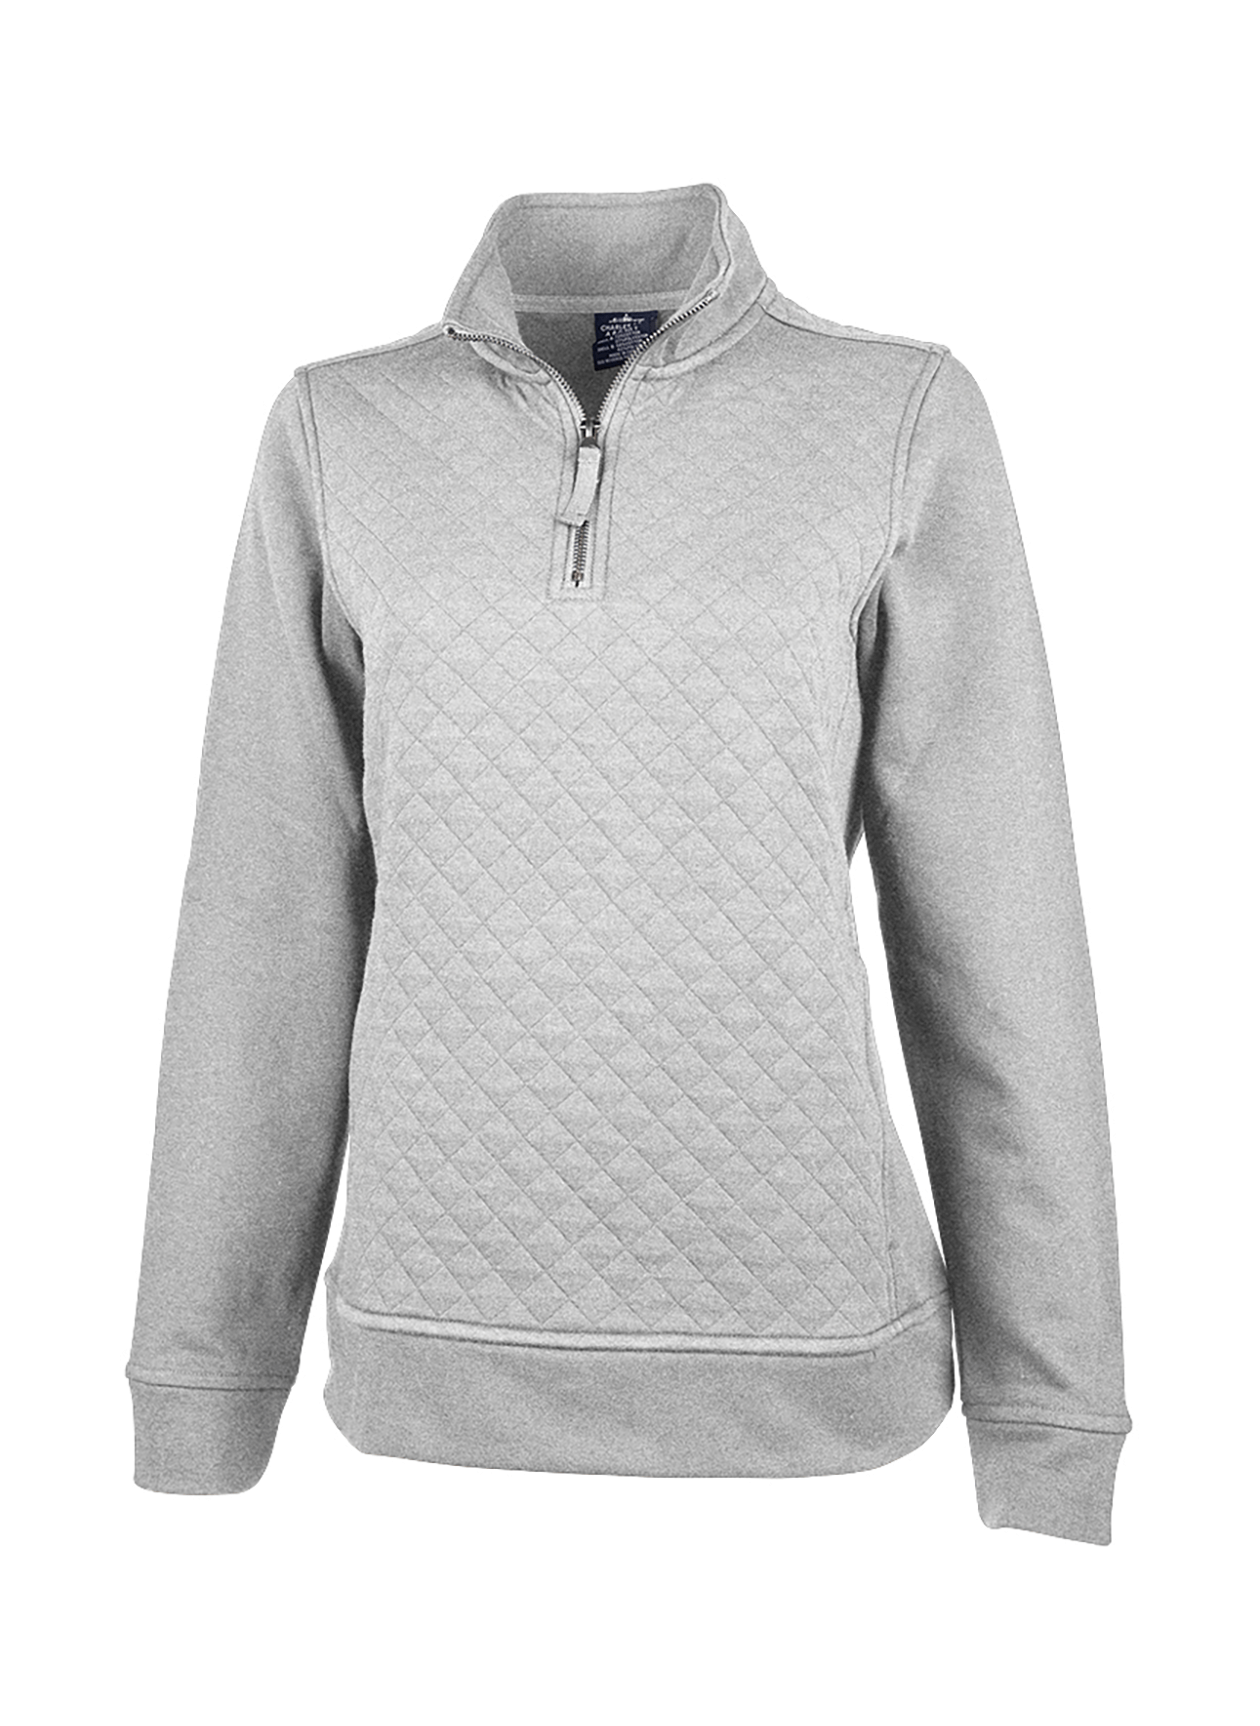 Charles River Women's Heather Grey Franconia Quilted Quarter-Zip